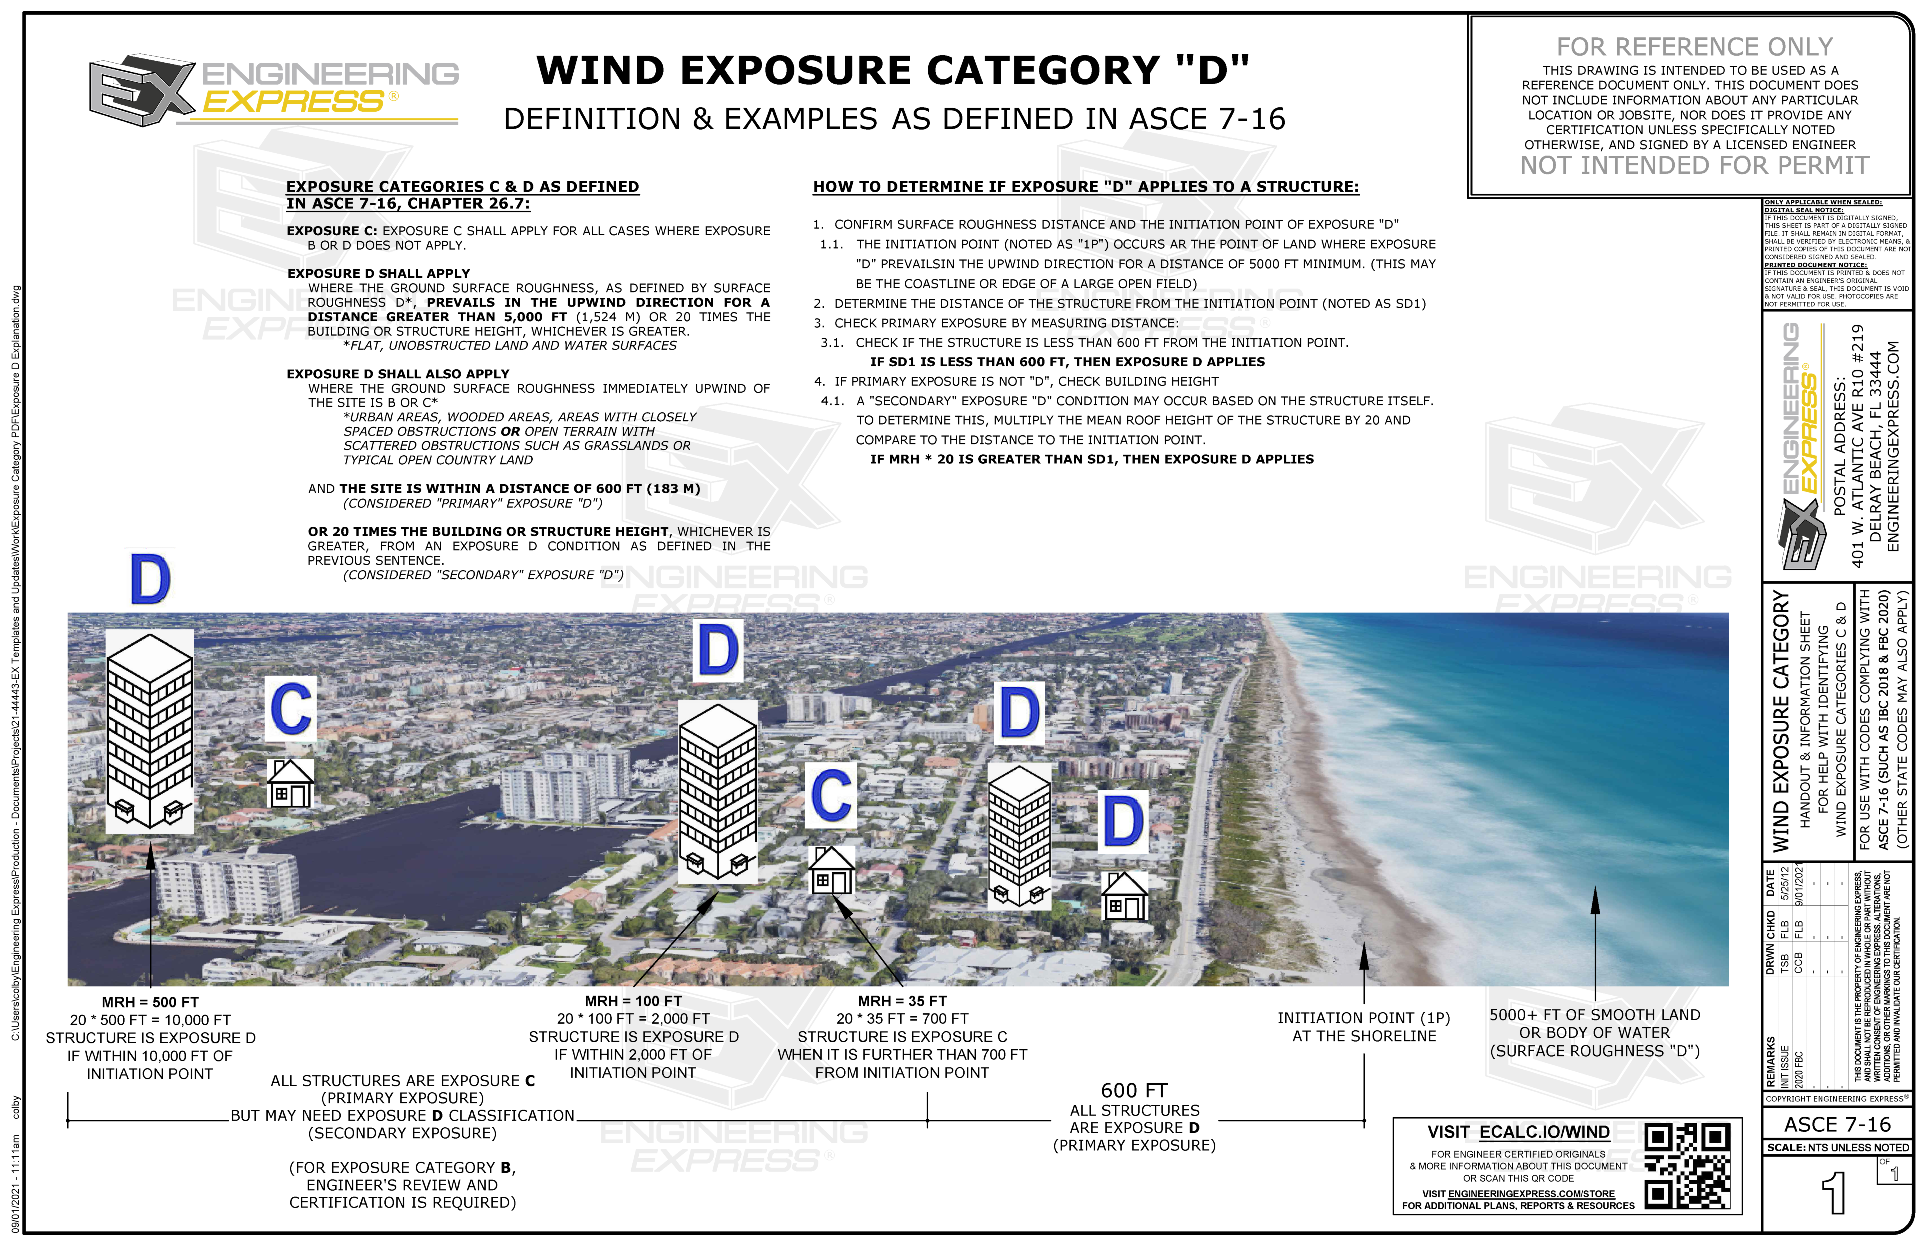 Wind Load Chart For Signs